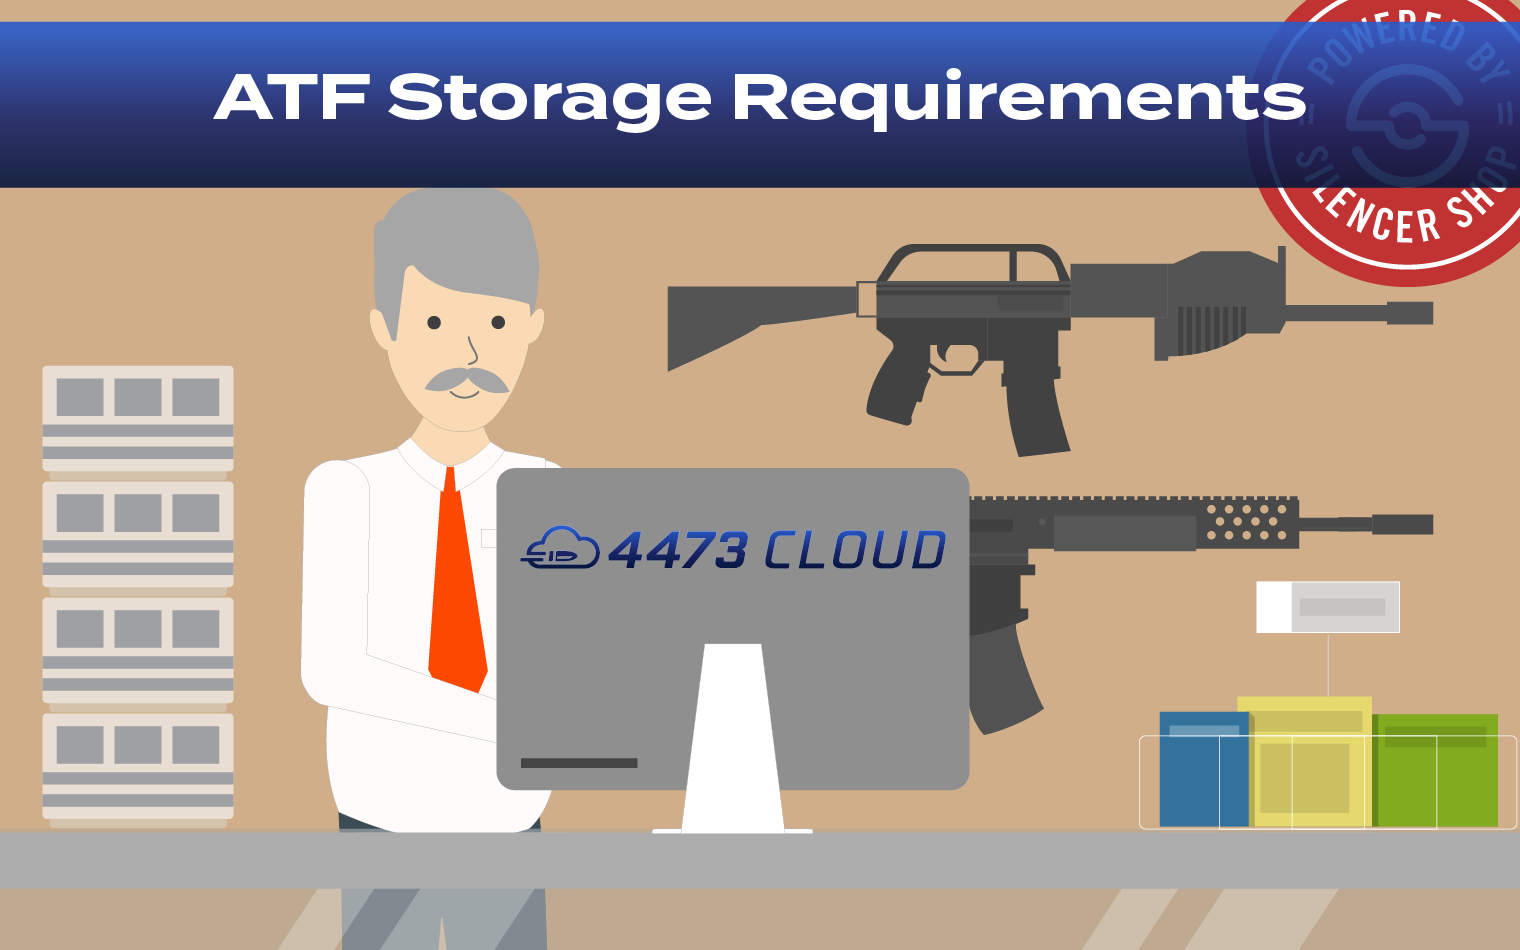 ATF Storage Requirements - 4473 Cloud